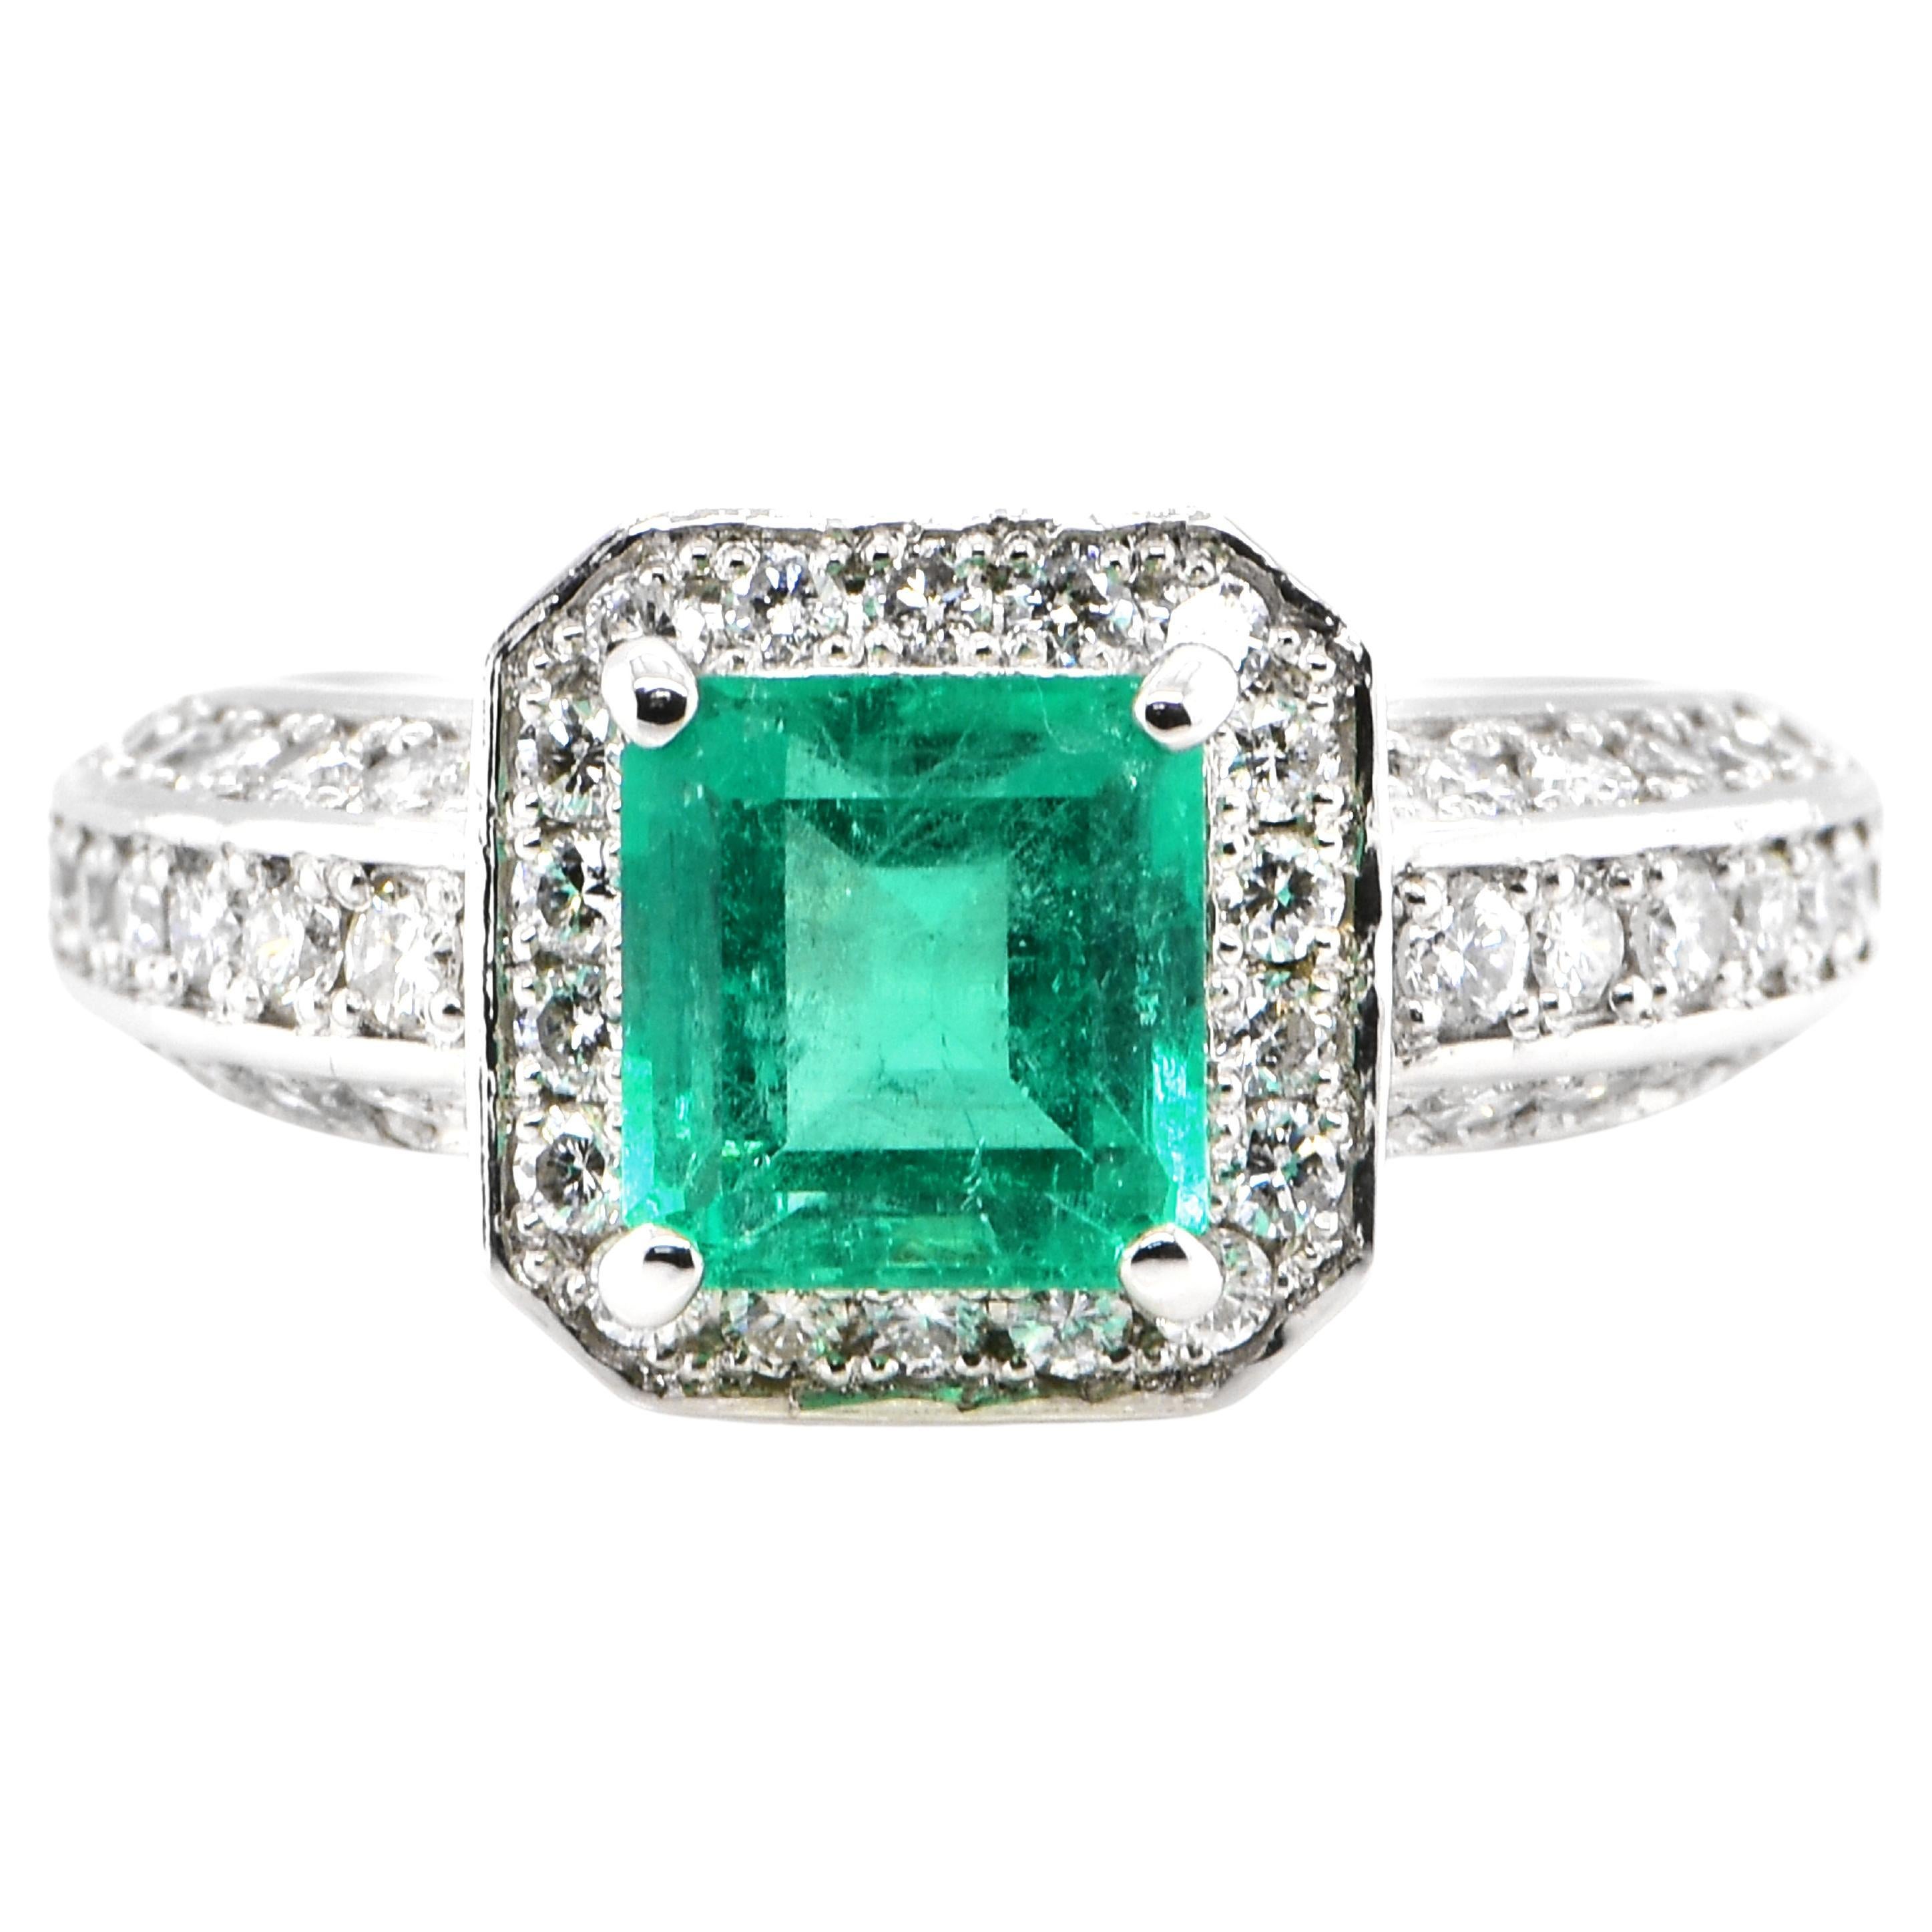 1.58 Carat Natural Colombian Emerald and Diamond Ring Set in Platinum